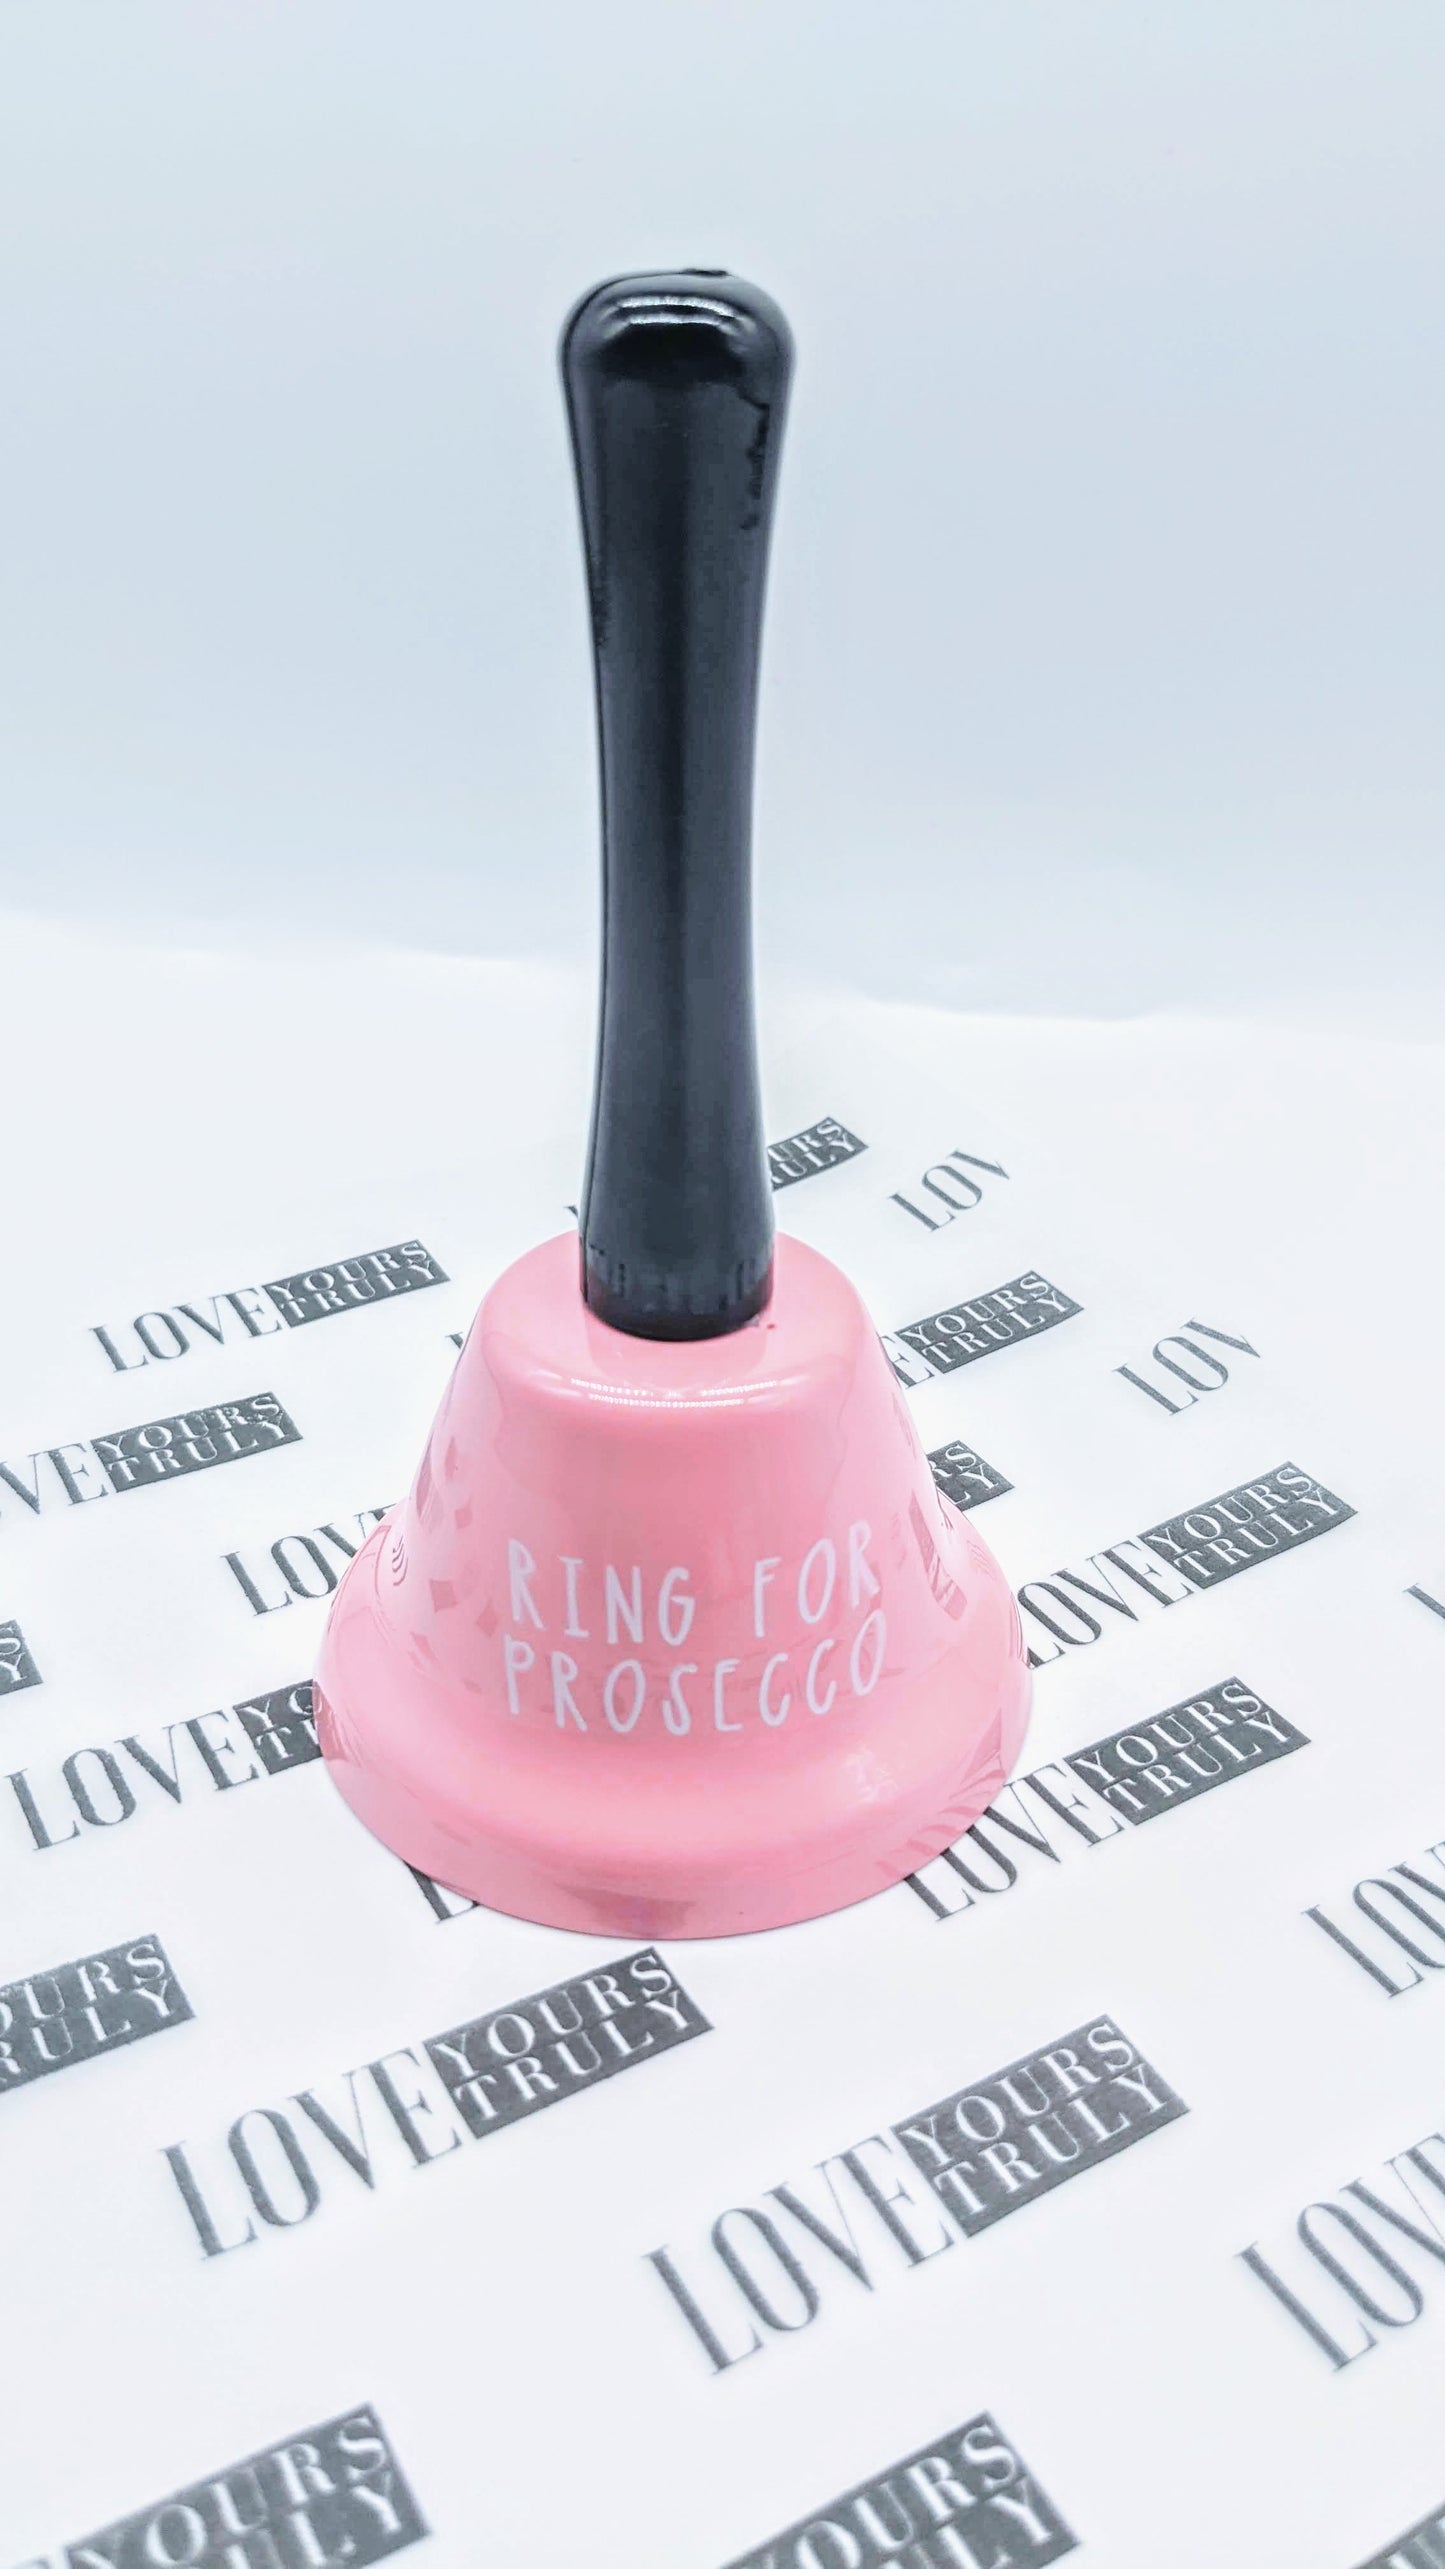 ADD ON - Ring for Prosecco Bell